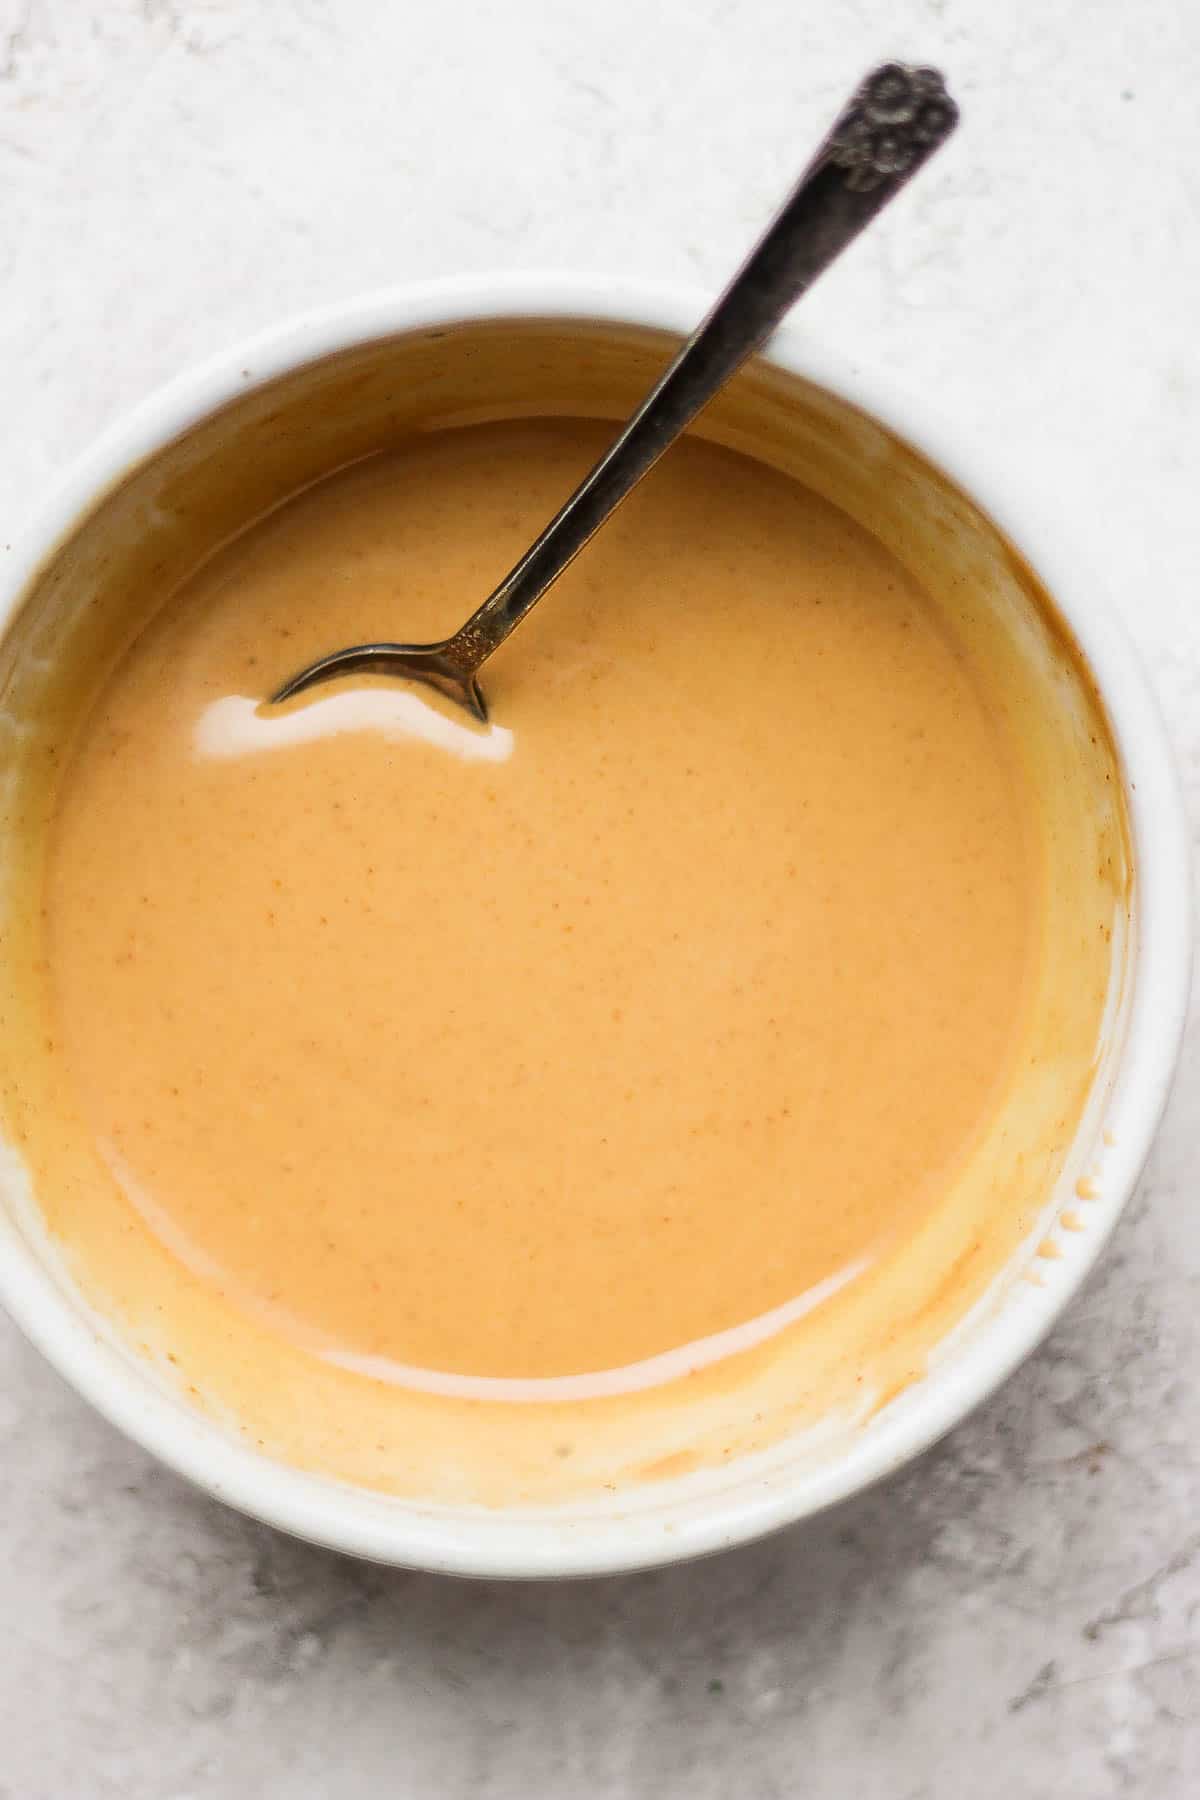 Peanut sauce in a small bowl with a spoon in the sauce leaning on the side of the bowl.